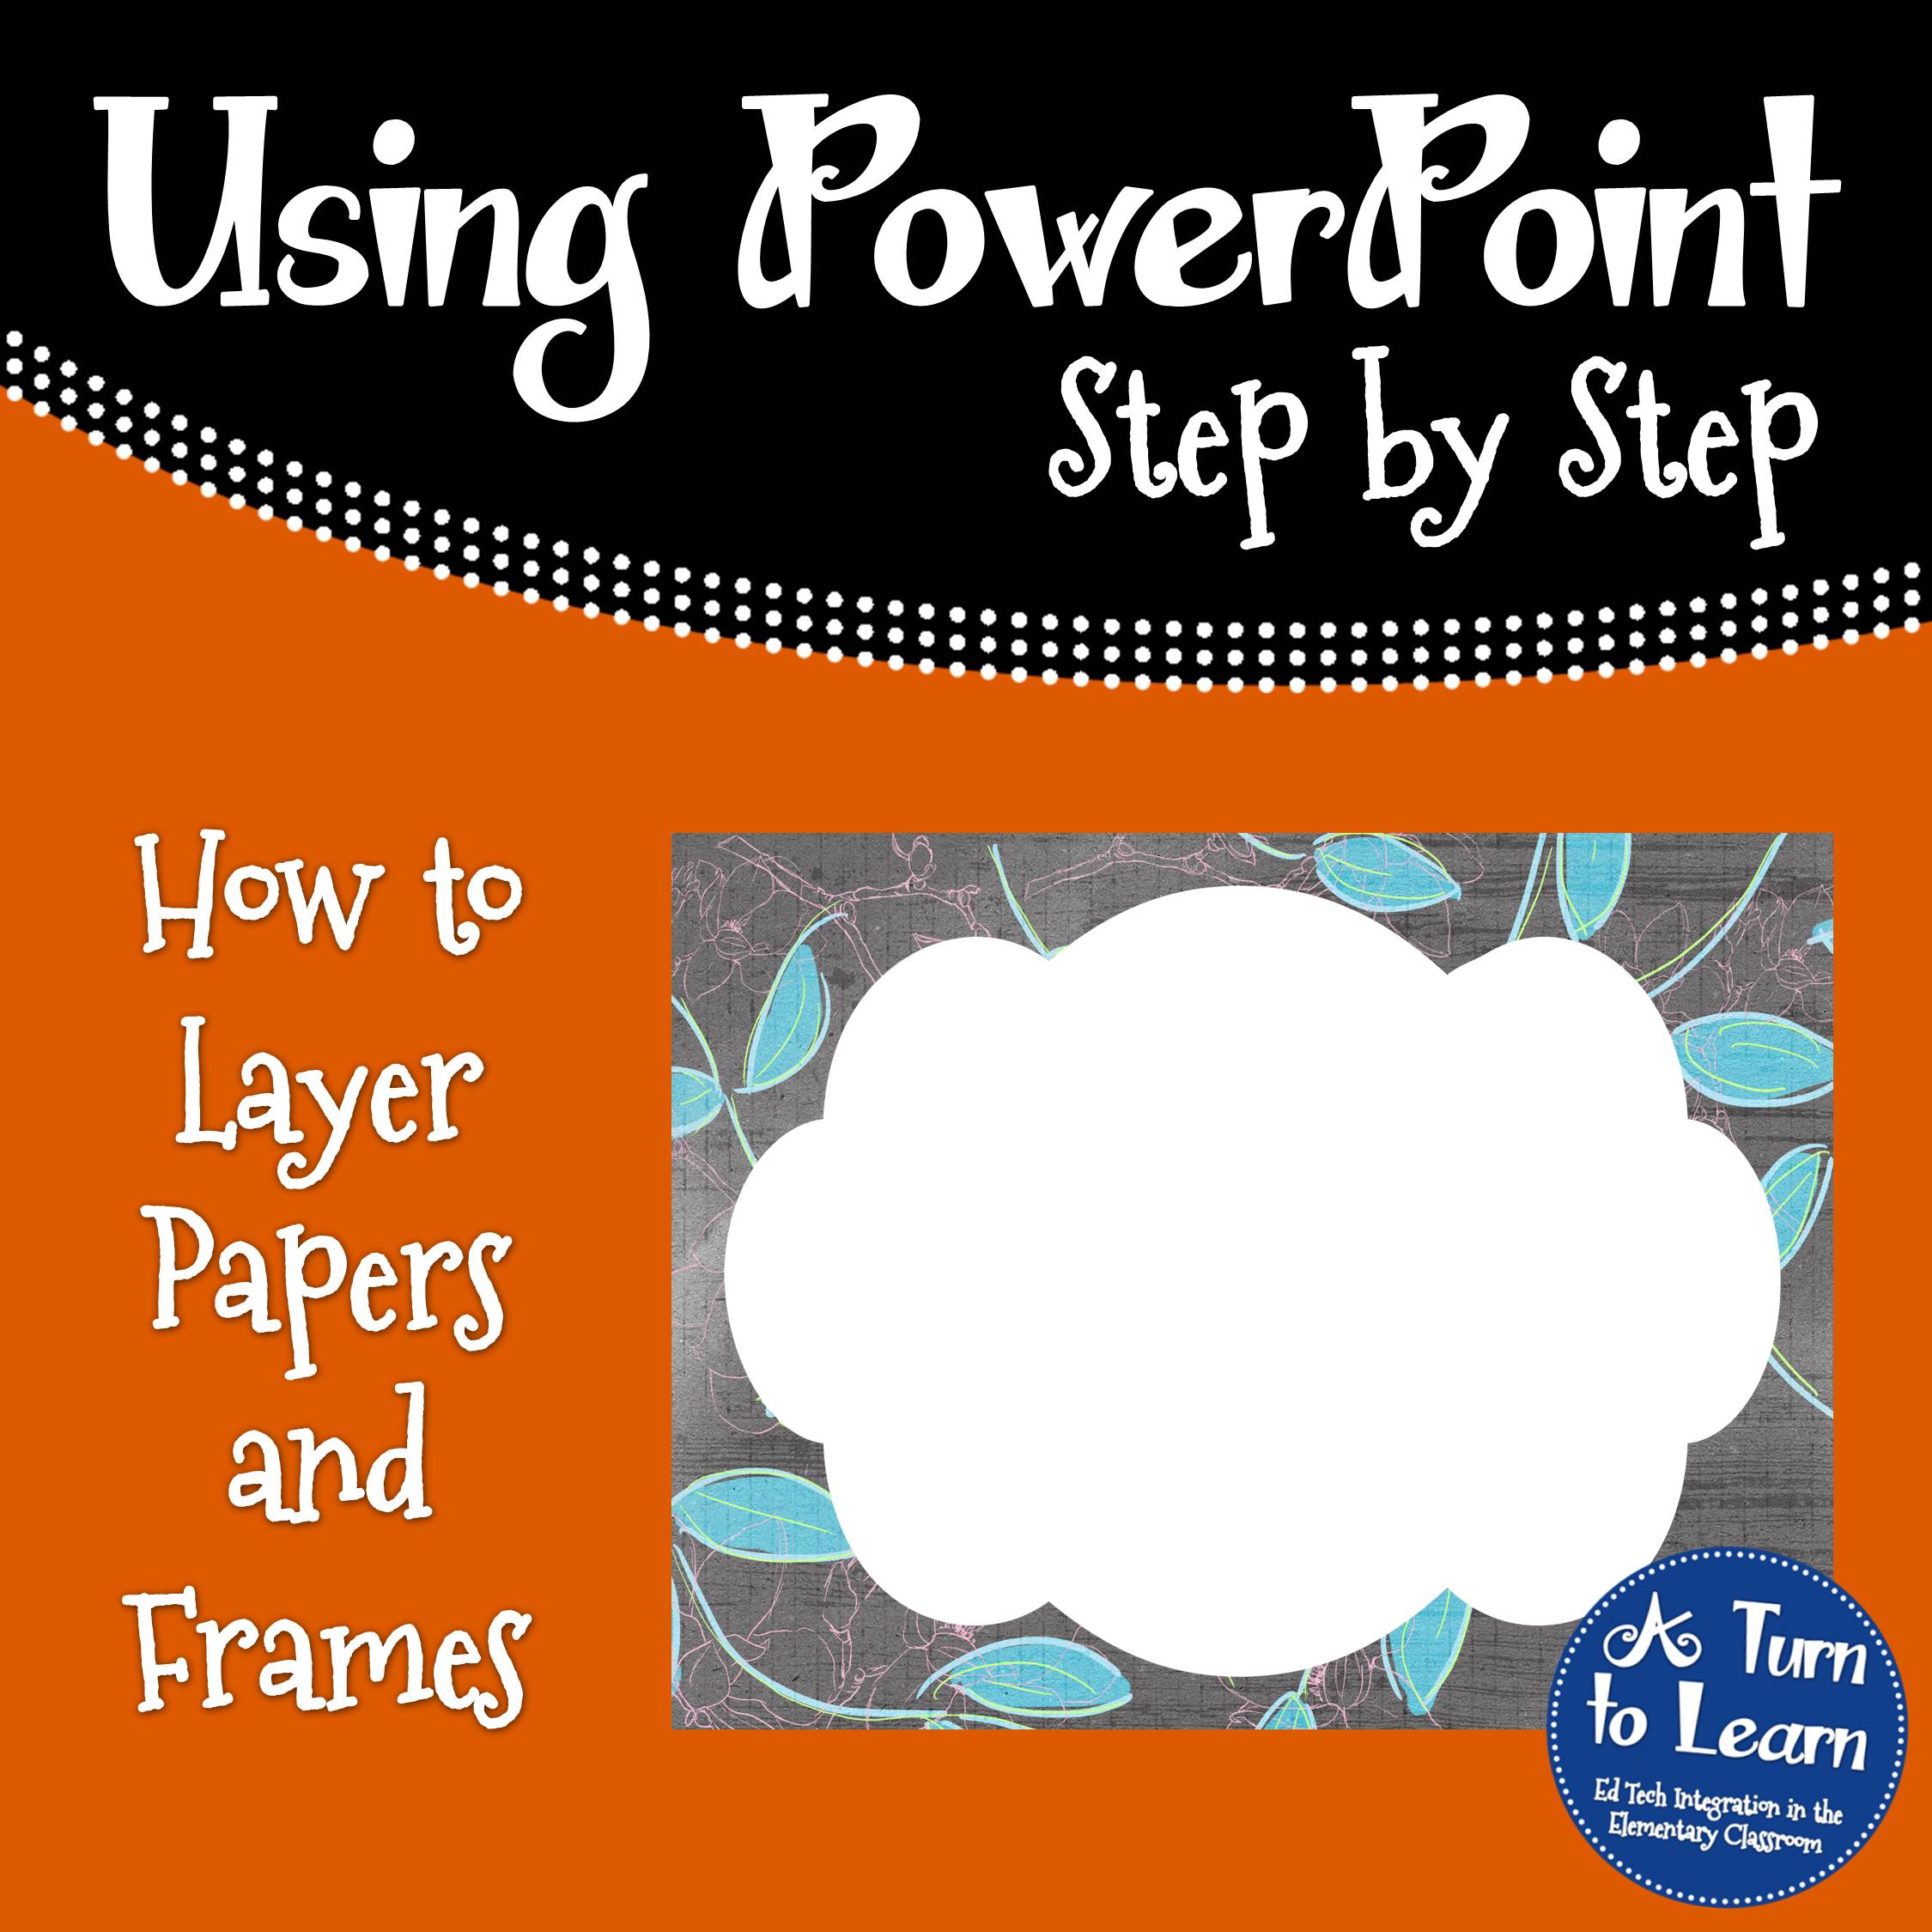 How to Layer Papers and Frames in PowerPoint